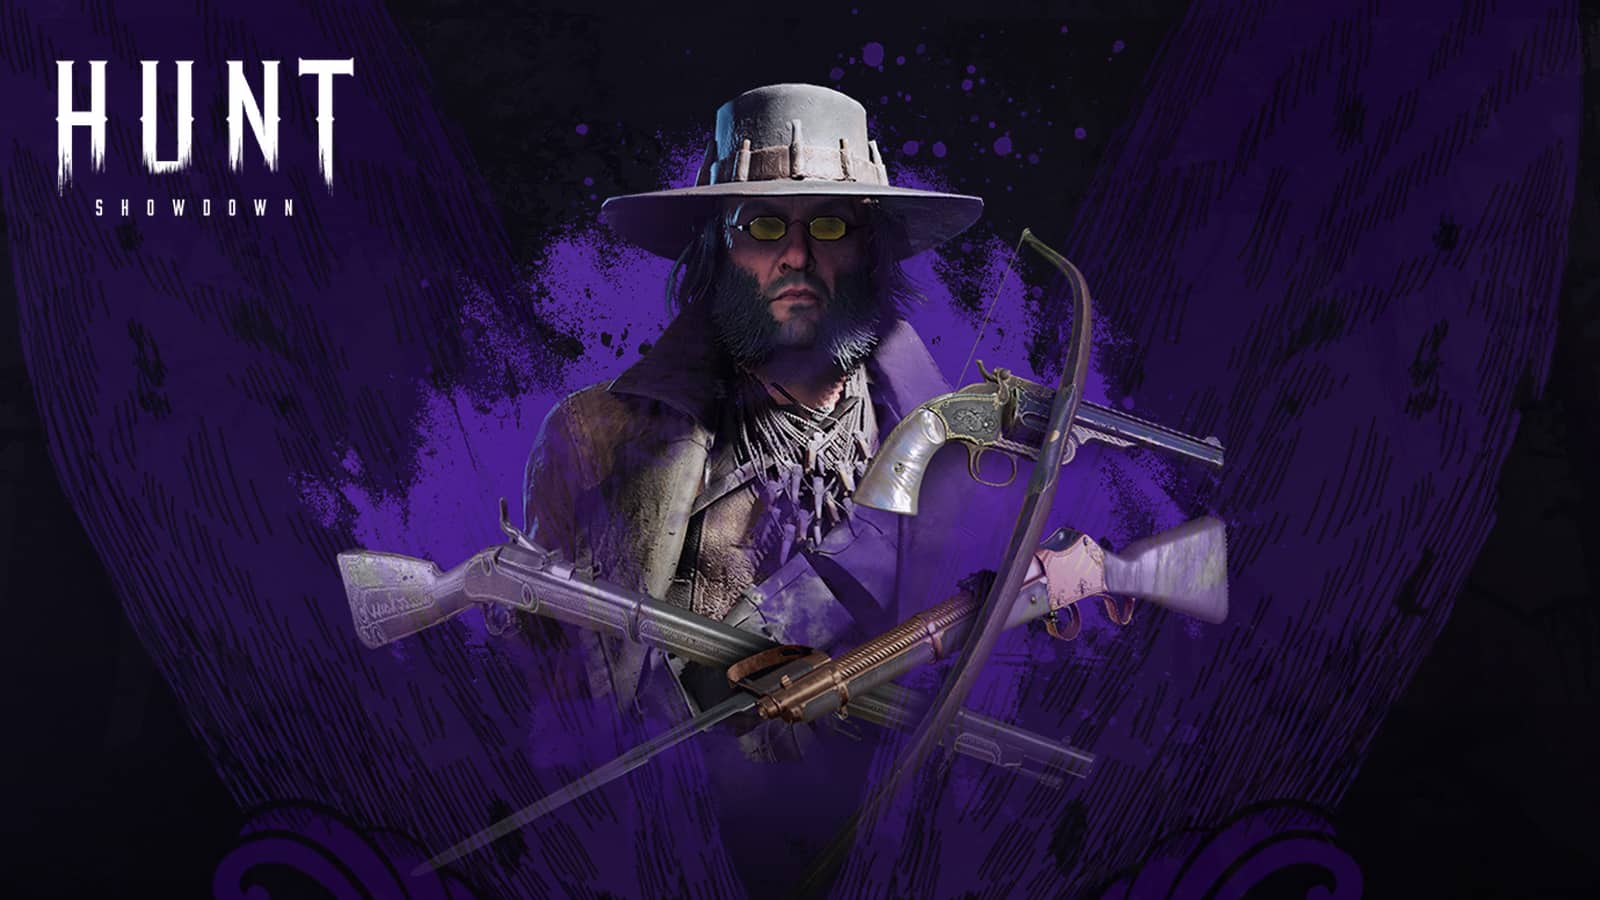 How to get Hunt Showdown Twitch Drops and Rewards